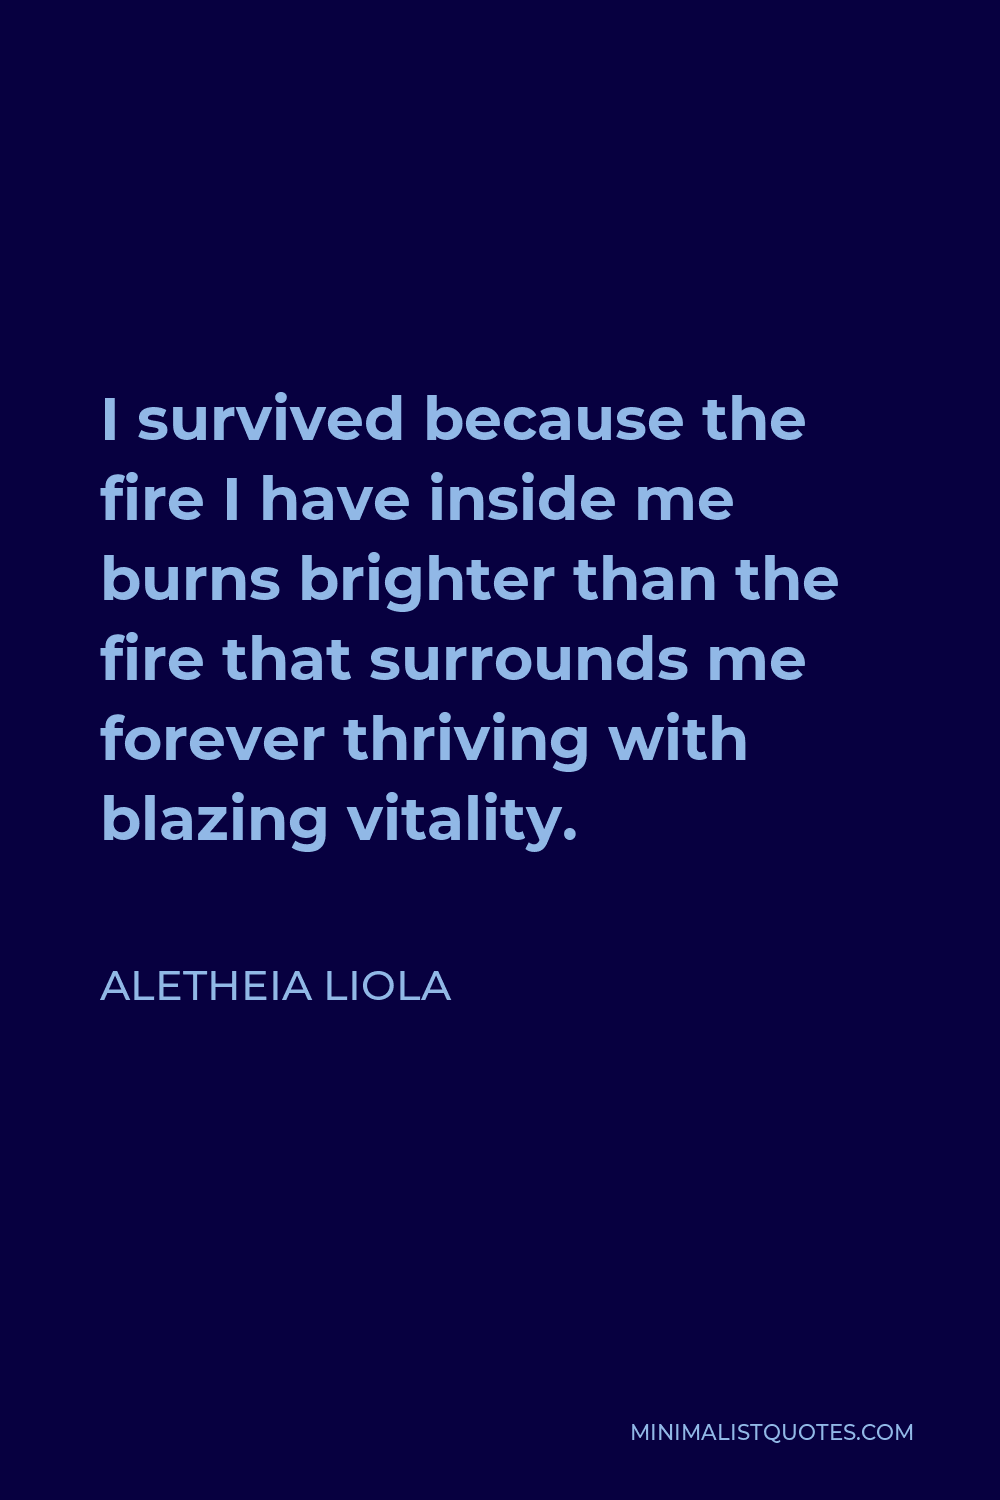 Aletheia Liola Quote - I survived because the fire I have inside me burns brighter than the fire that surrounds me forever thriving with blazing vitality.